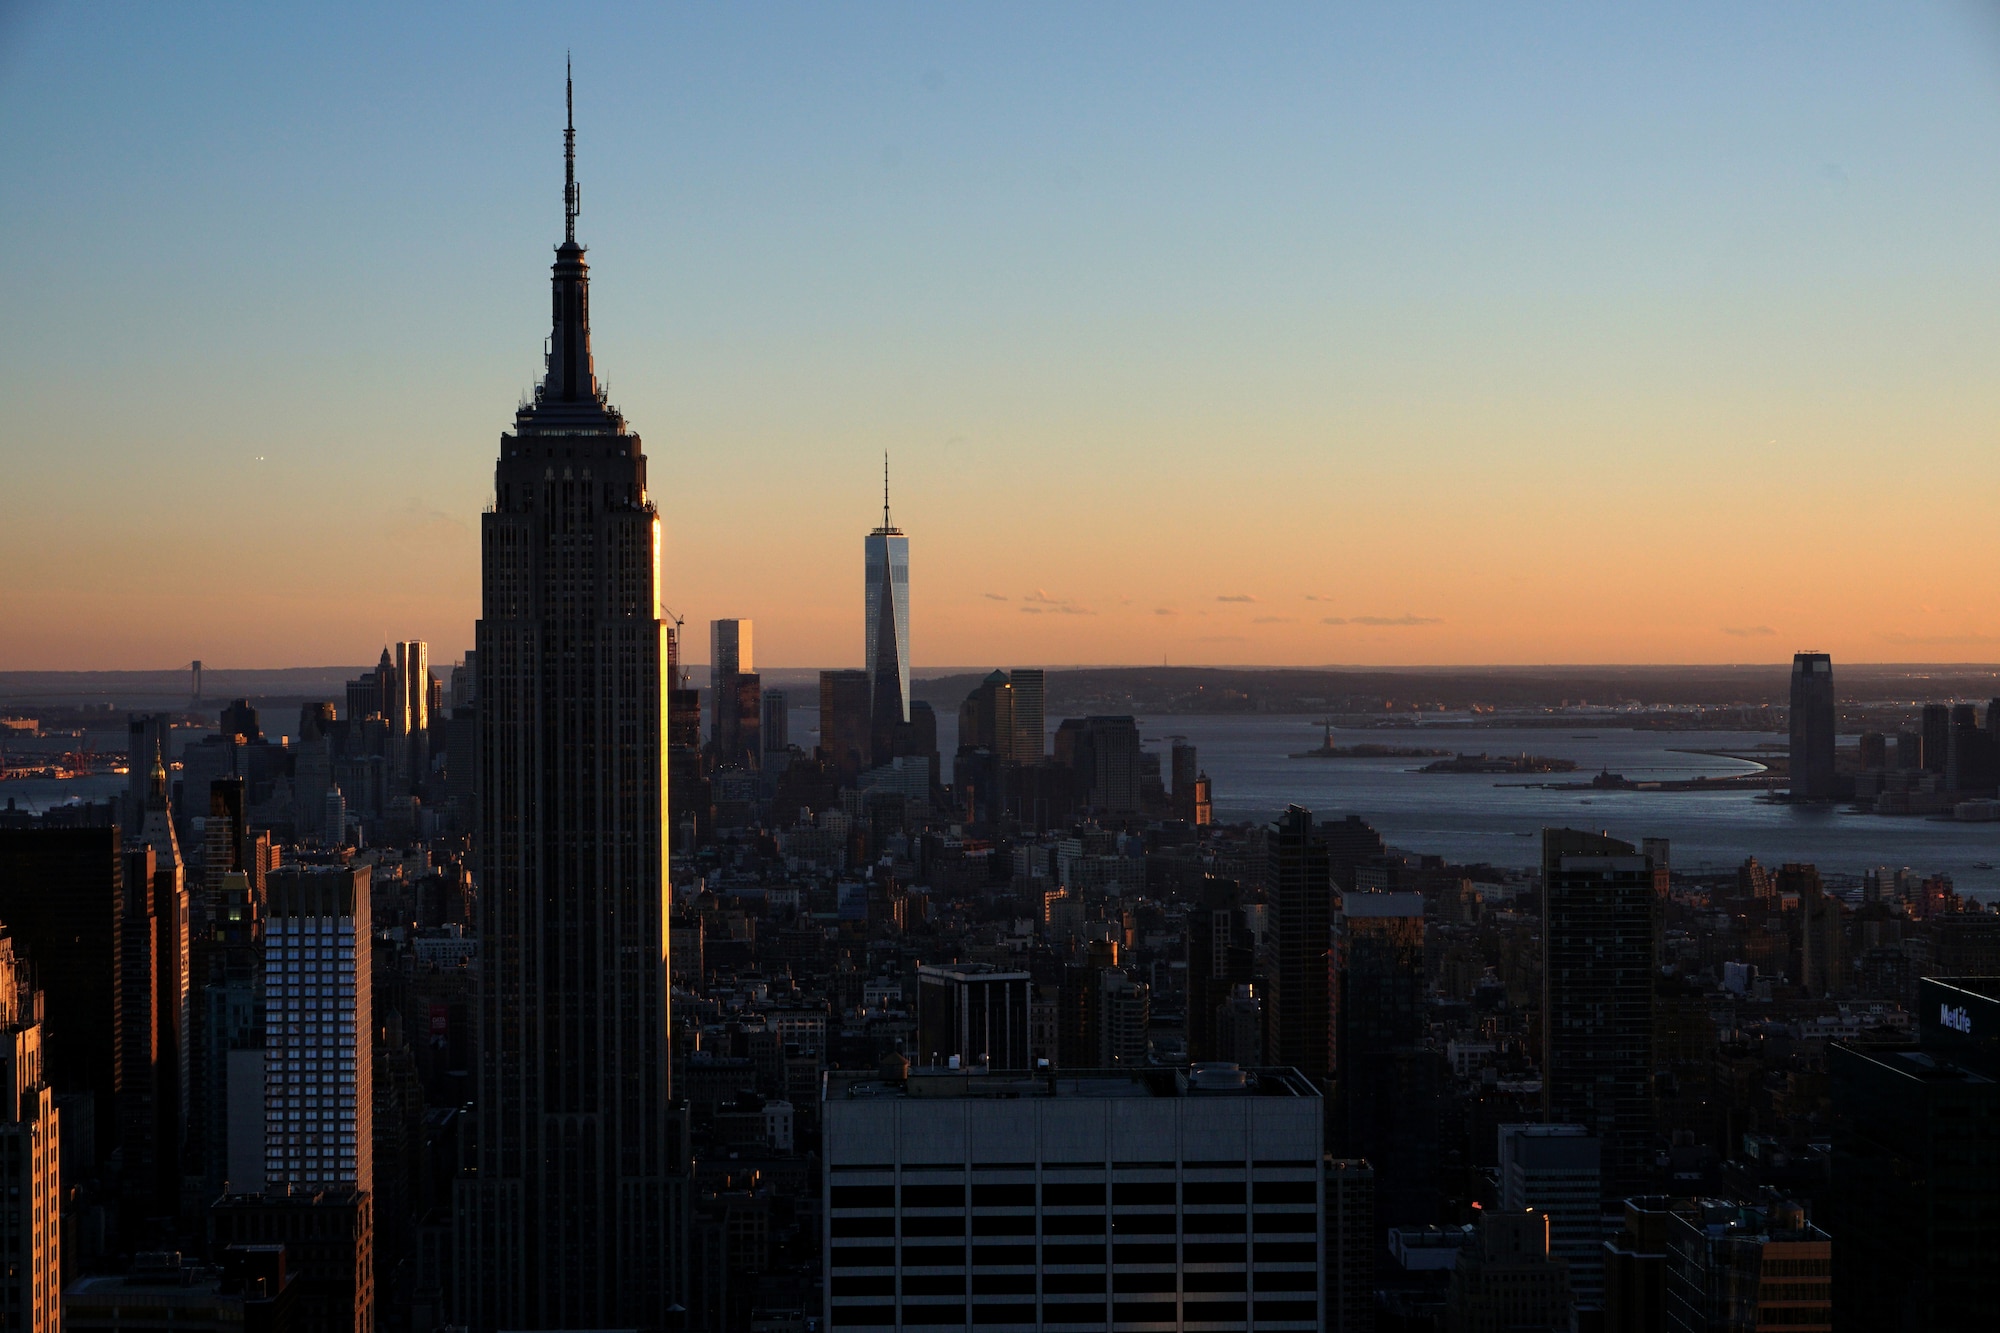 The skyline of New York City presented from the Rockefeller Center March 17, 2015. Procrastination can make life goals challenging, whether it’s getting a new job or going on an adventure to NYC, people should keep their goals in mind when managing their time. (U.S. Air Force photo by Airman 1st Class Malcolm Mayfield)